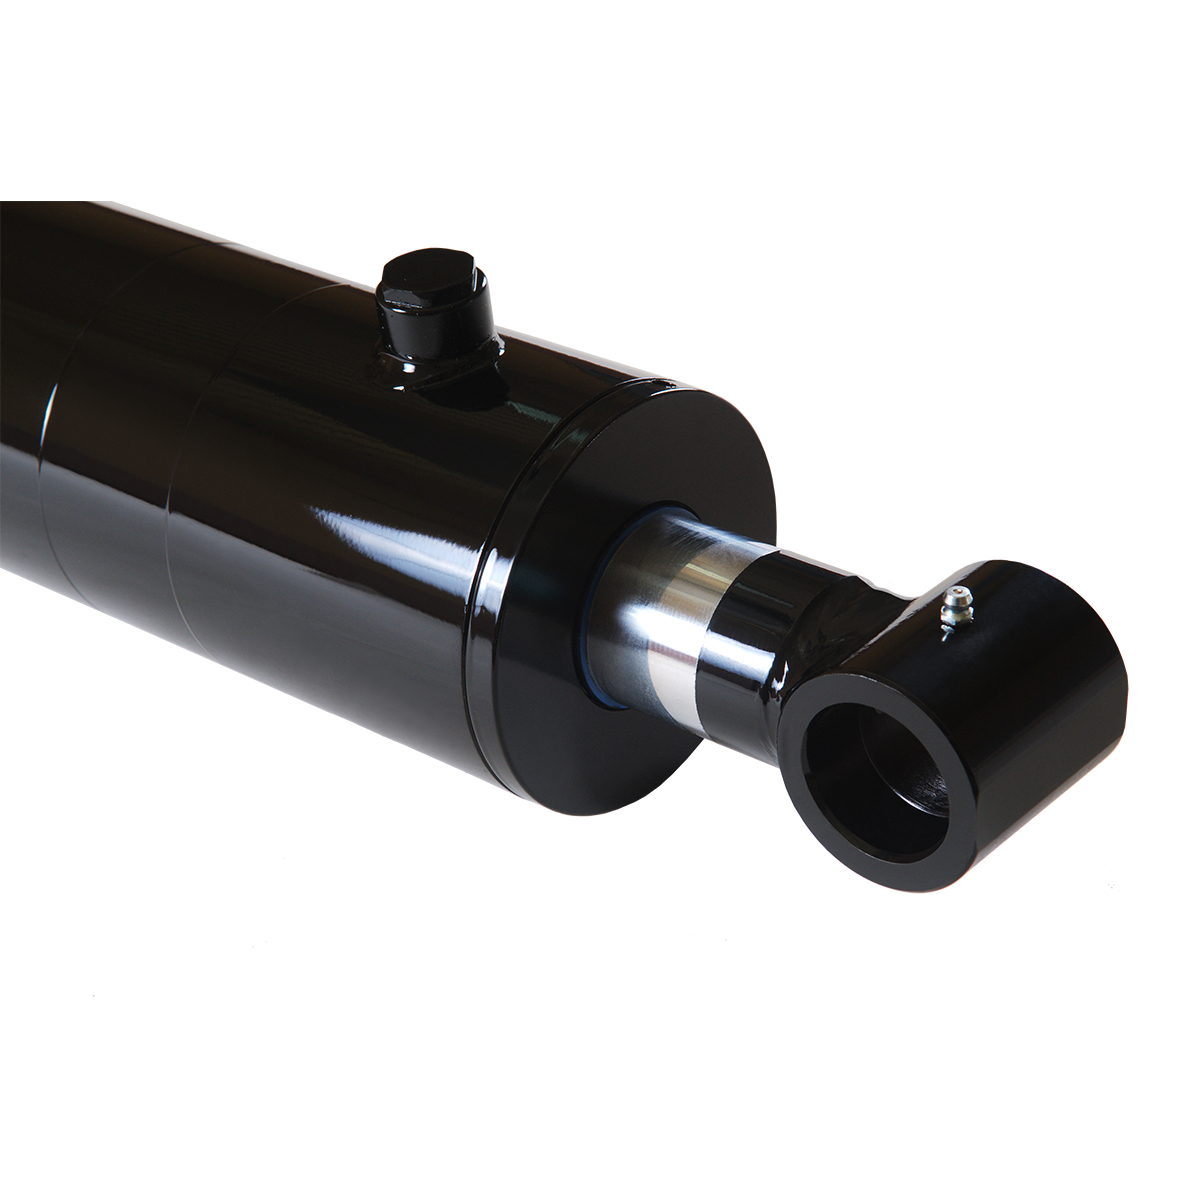 4 bore x 6 stroke hydraulic cylinder, welded cross tube double acting cylinder | Magister Hydraulics